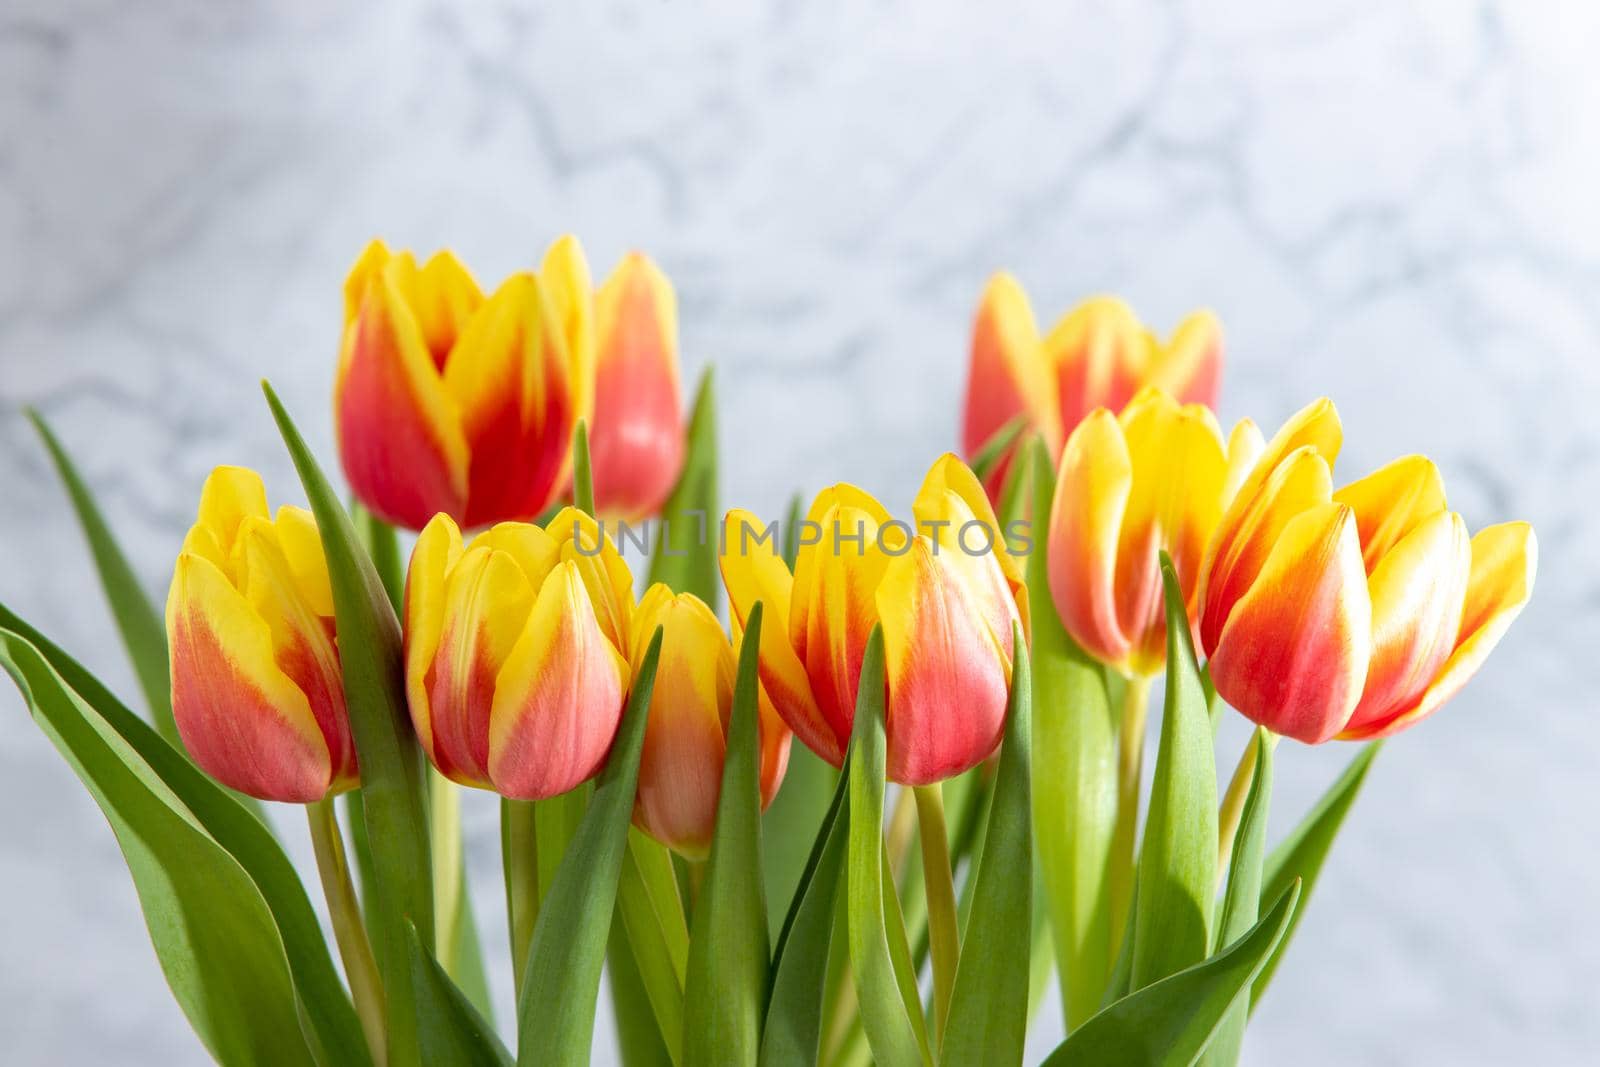 Bouquet with yellow red tulips against a grey marbled background